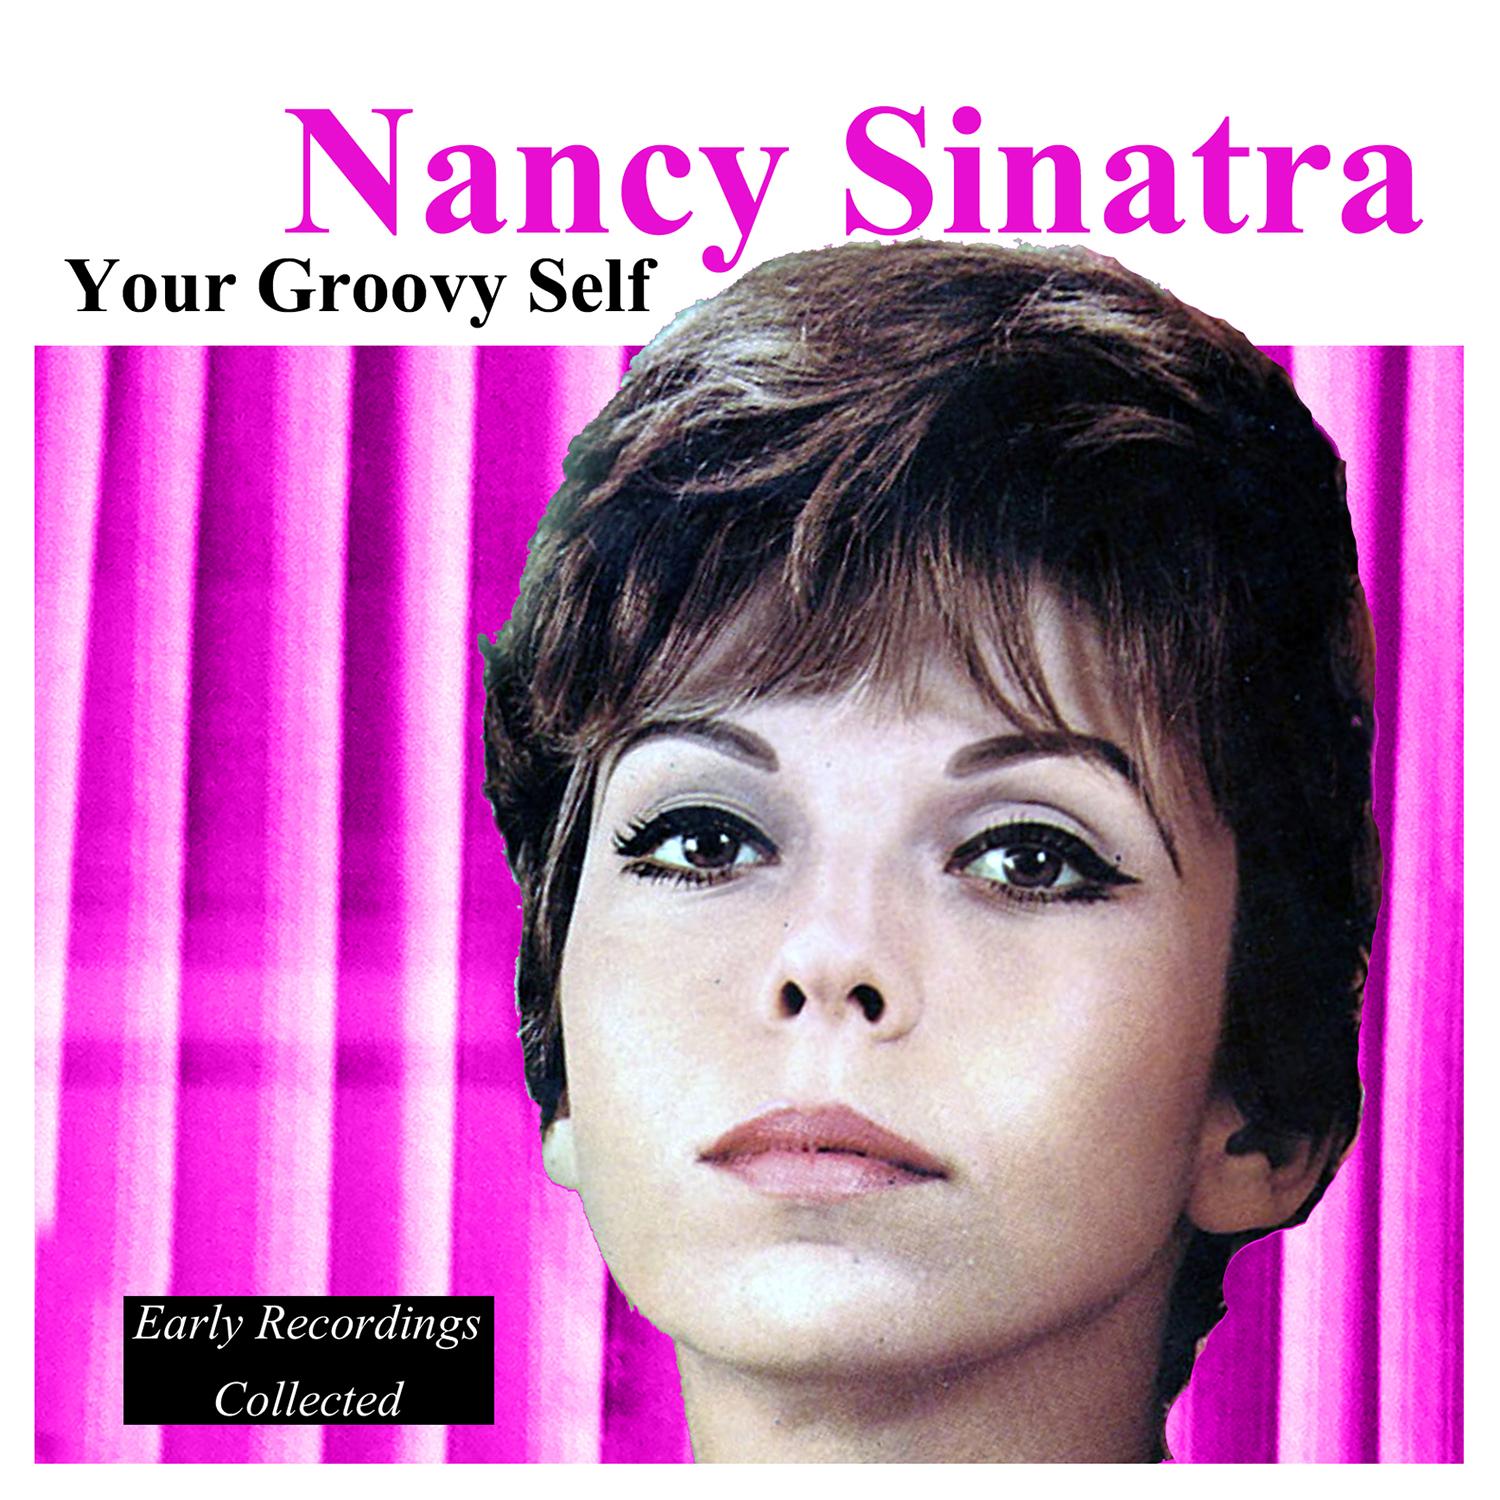 Your Groovy Self, Early Recordings Collected (Remastered)